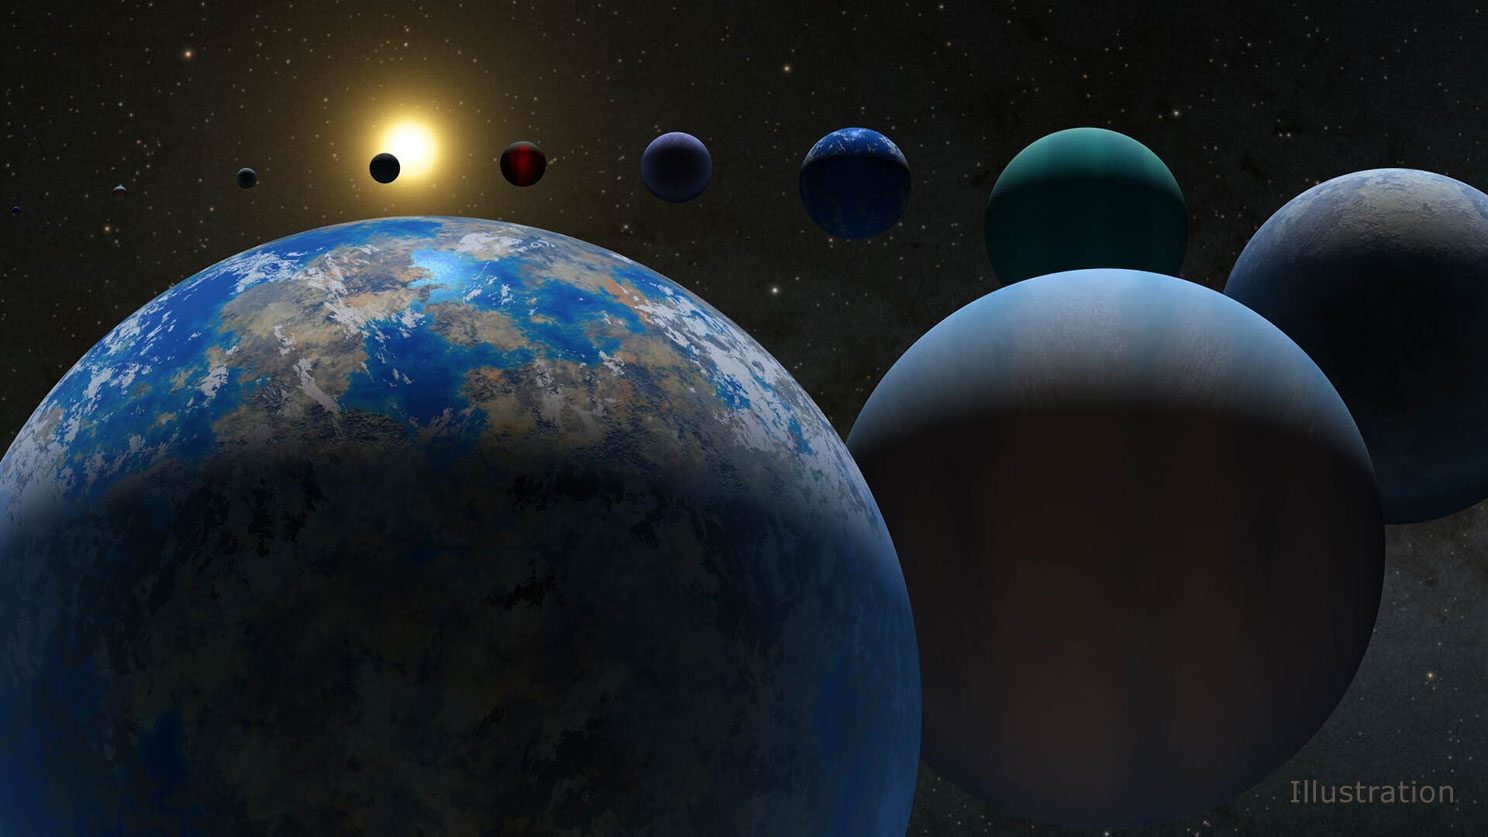 NASA confirmed that 5,000 exoplanets have been found, as of March 2022.